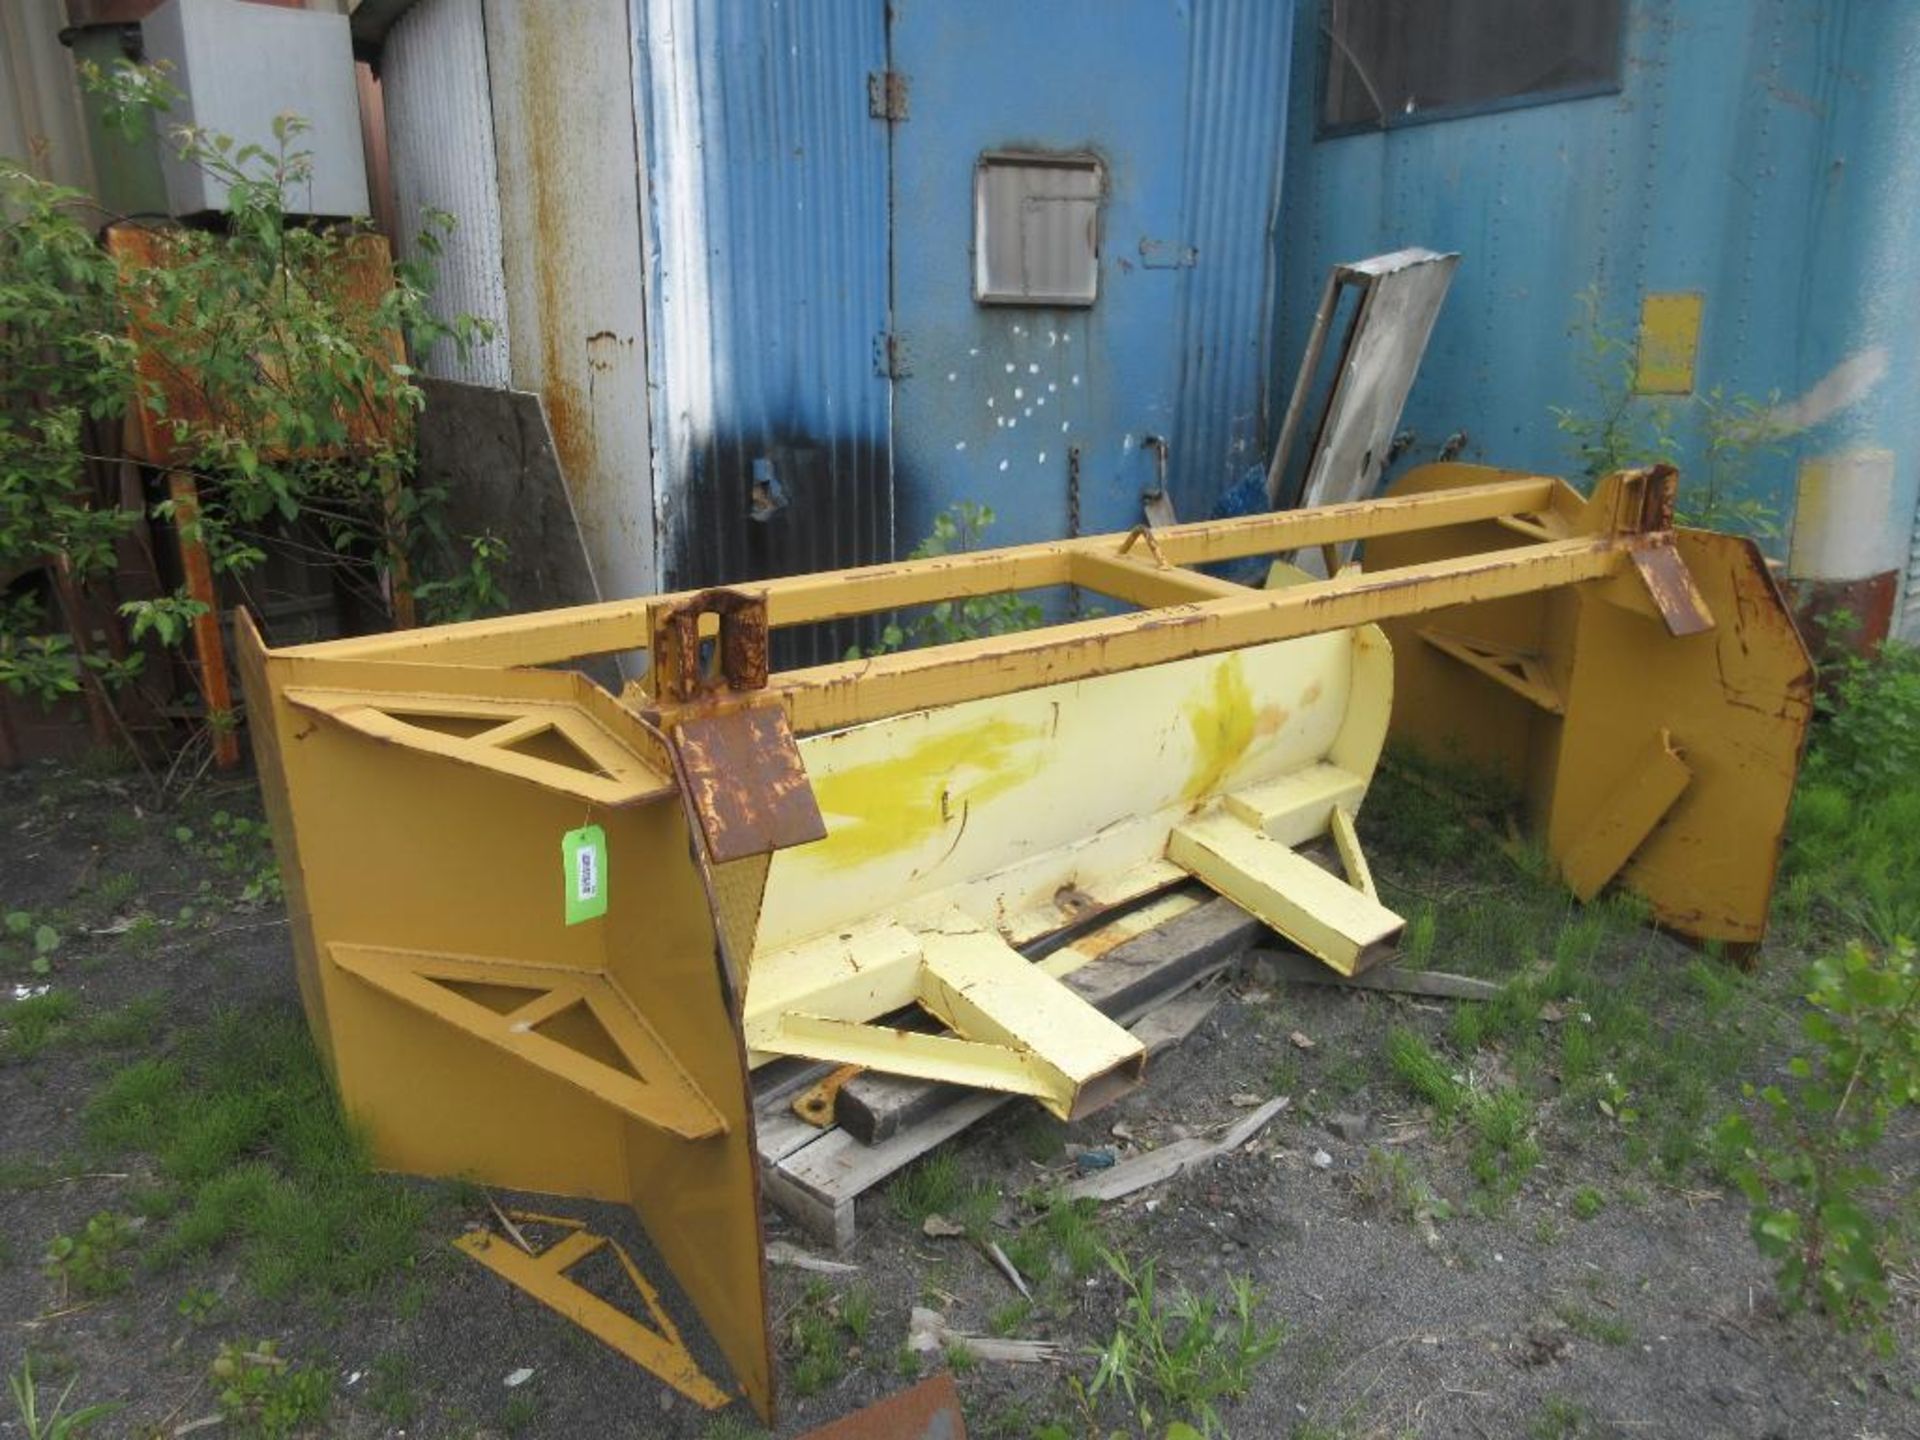 LOT OF 6 SNOW PLOUGH IBG.GRATING FOR TRUCK ATTACHMENTS (NORTH PAINT BLDG) - Image 3 of 14